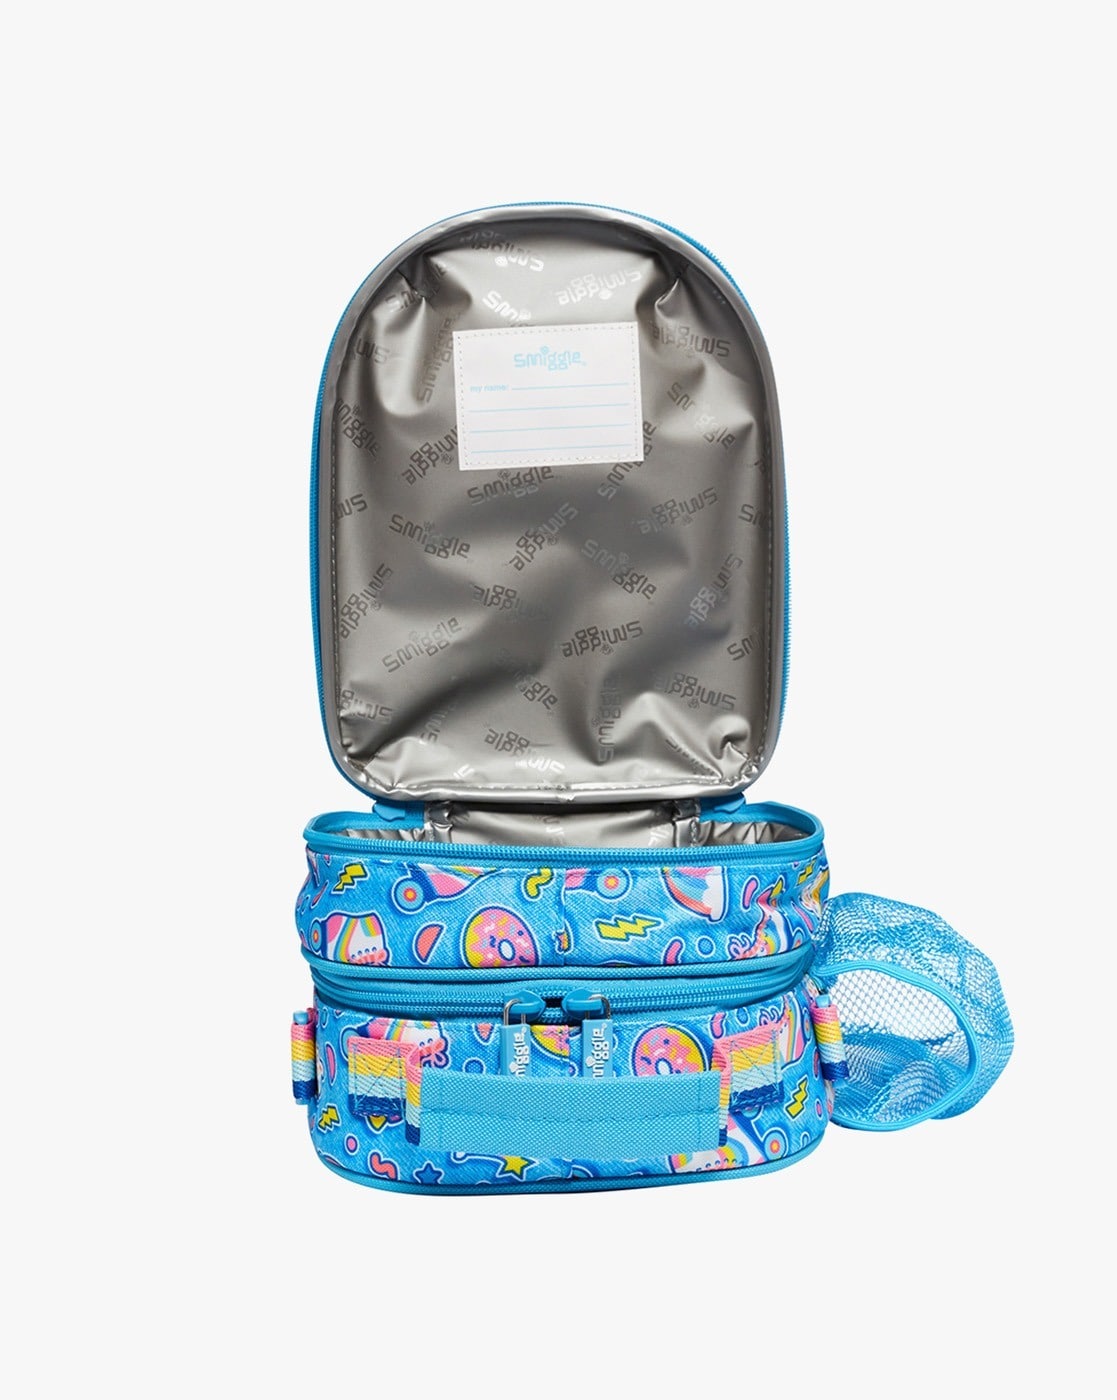 Smiggle Flow Double Decker Large Spacious Lunchbox with Double Zips, Padded  Insulated Lining Kids Non-Toxic Tiffin Box Case Lunch Bag for School -  Heart Print : Amazon.in: Home & Kitchen